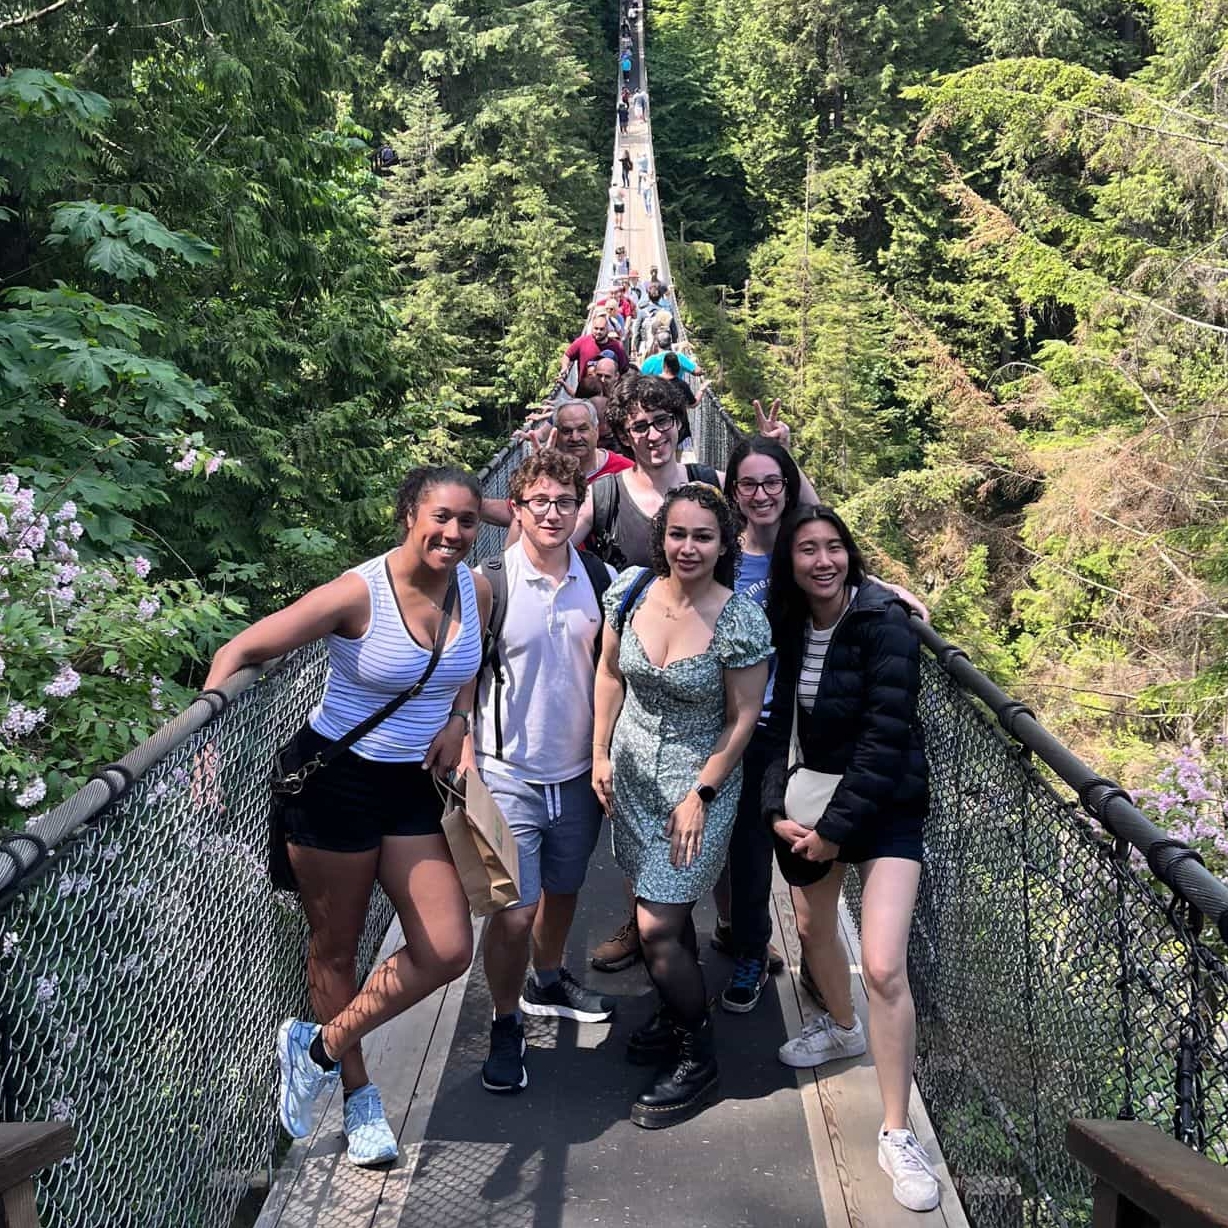 Jenna, Pierre, Liam, Armaghan, Rachele, and Kathy at the Capilano Suspension Bridge Park